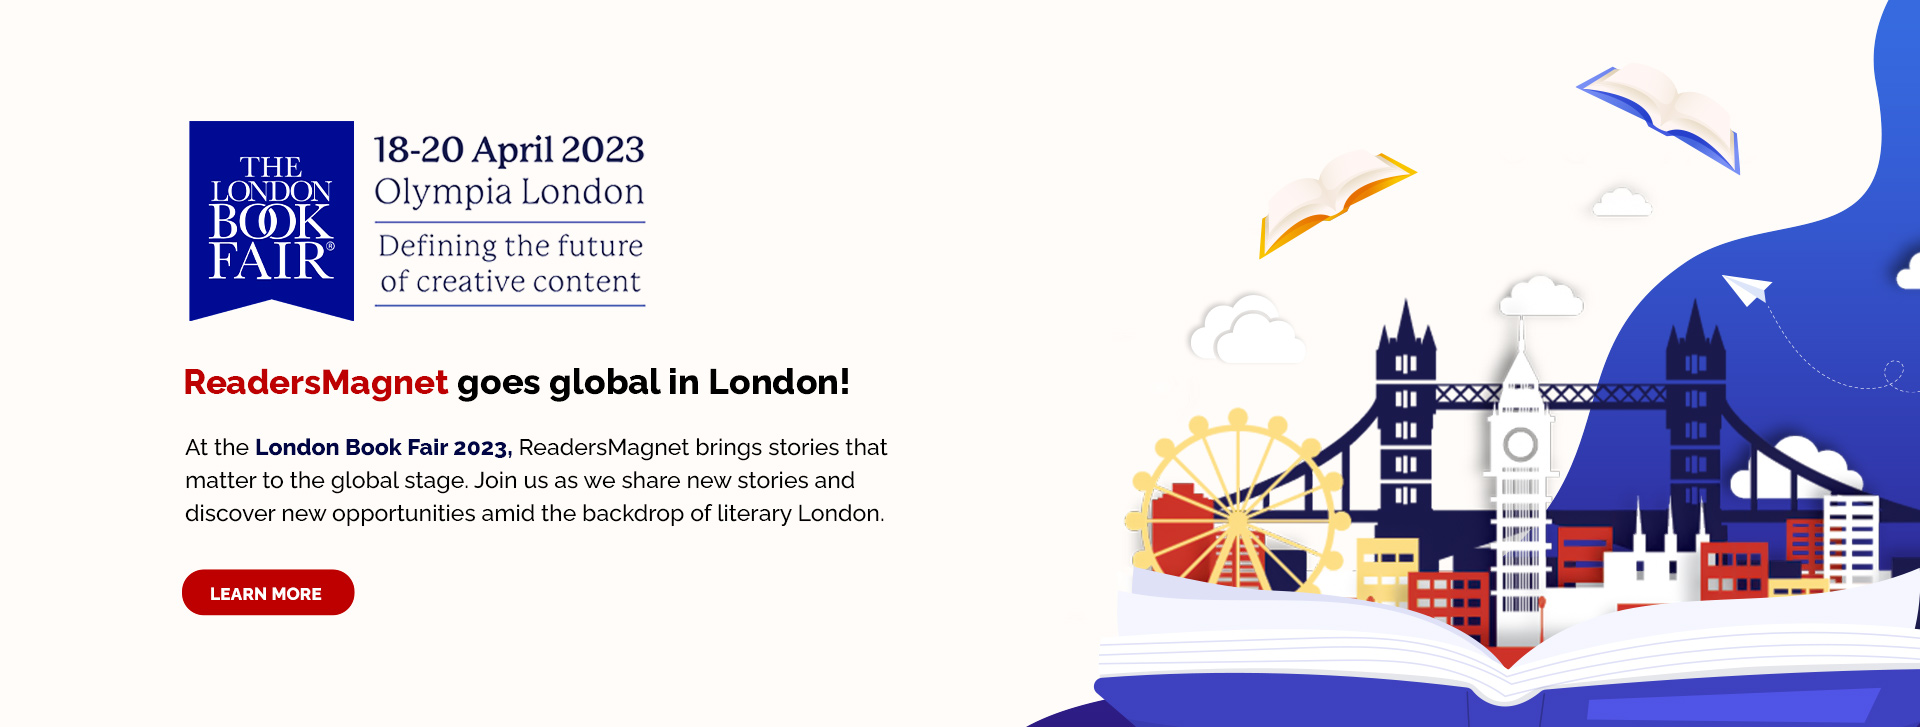 ReadersMagnet at The London Book Fair 2023: Taking your story to the global stage, Olympia London, London, United Kingdom